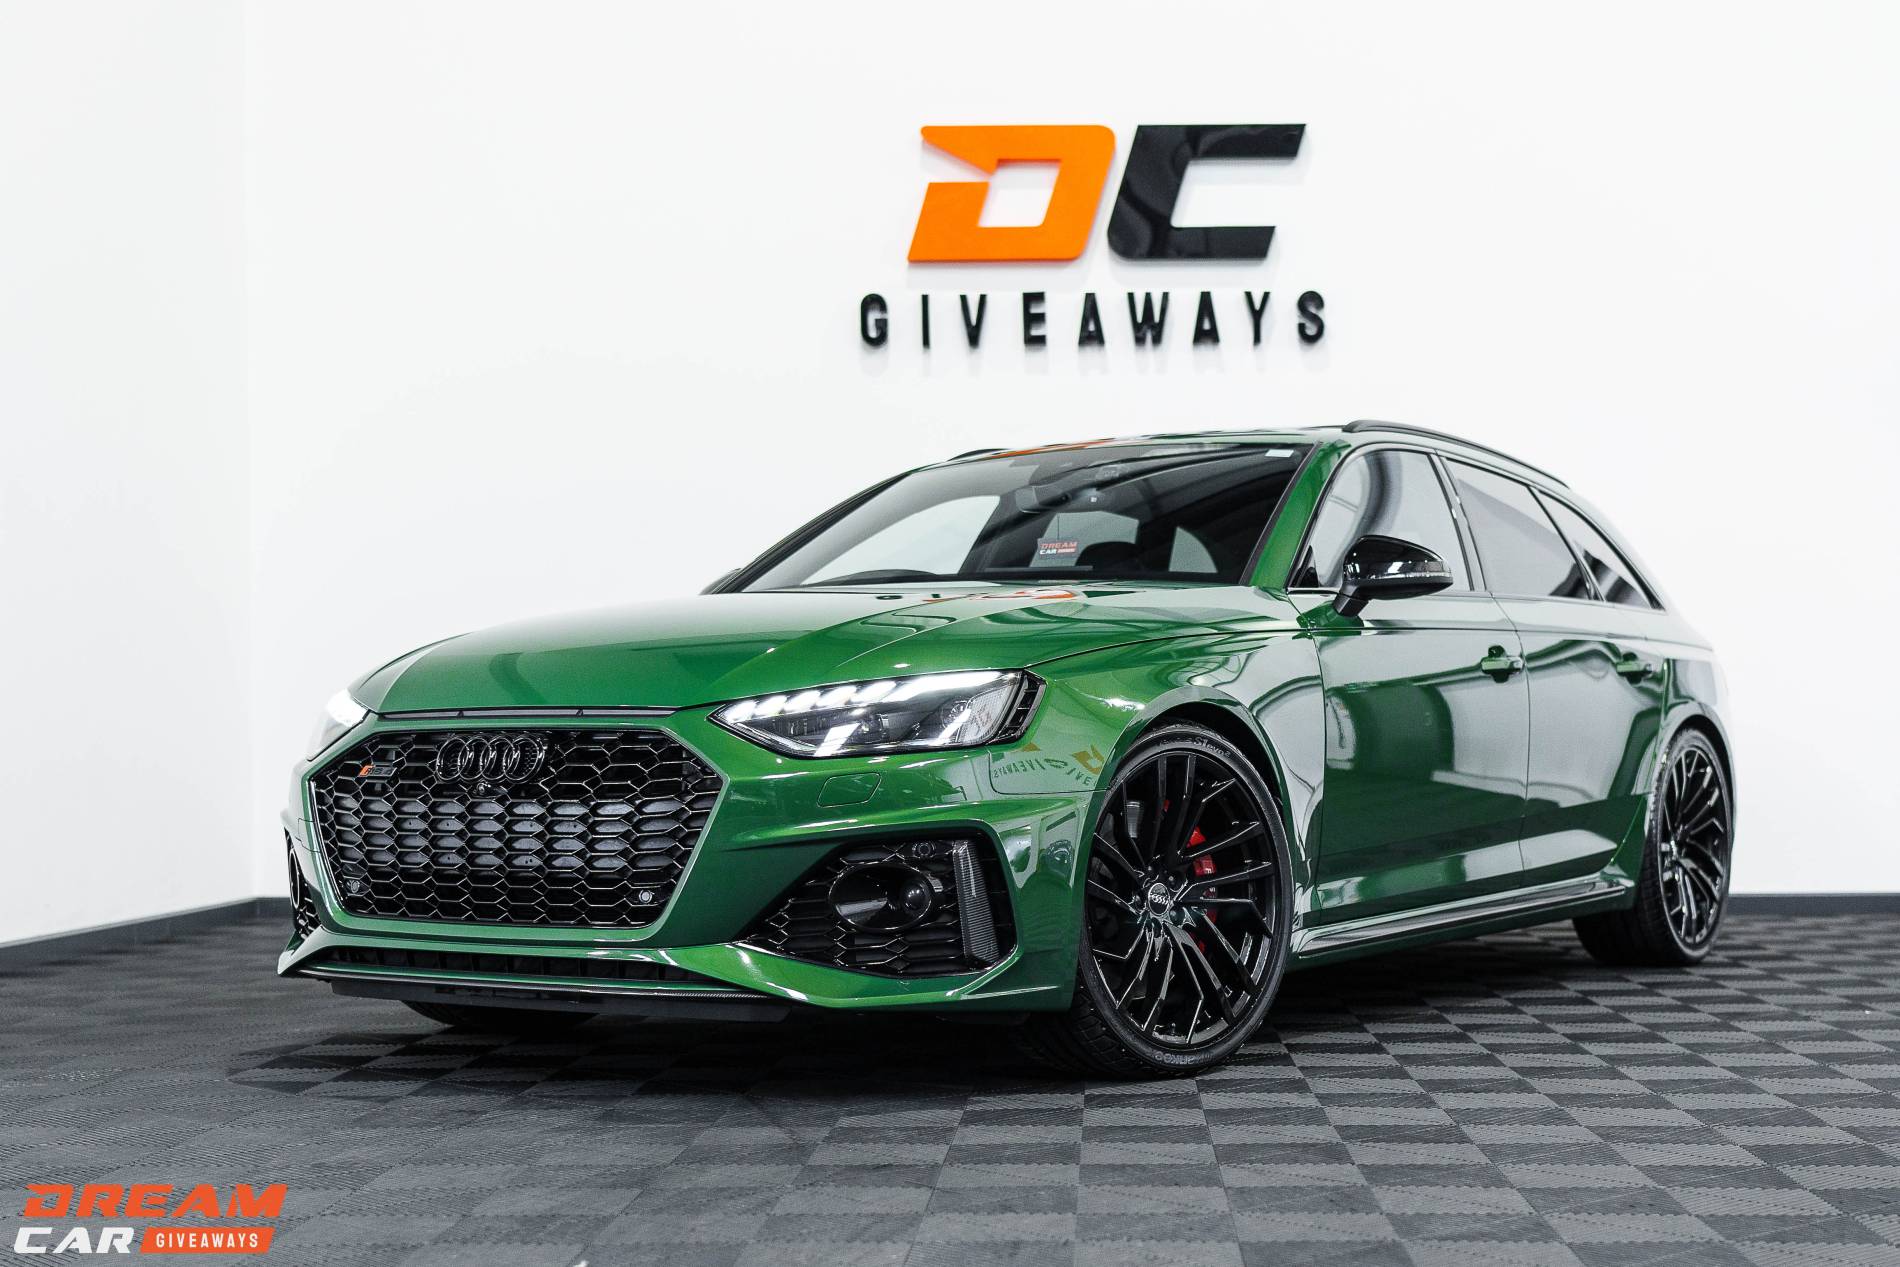 Win This Audi RS4 & £1,000 or £42,000 Tax Free